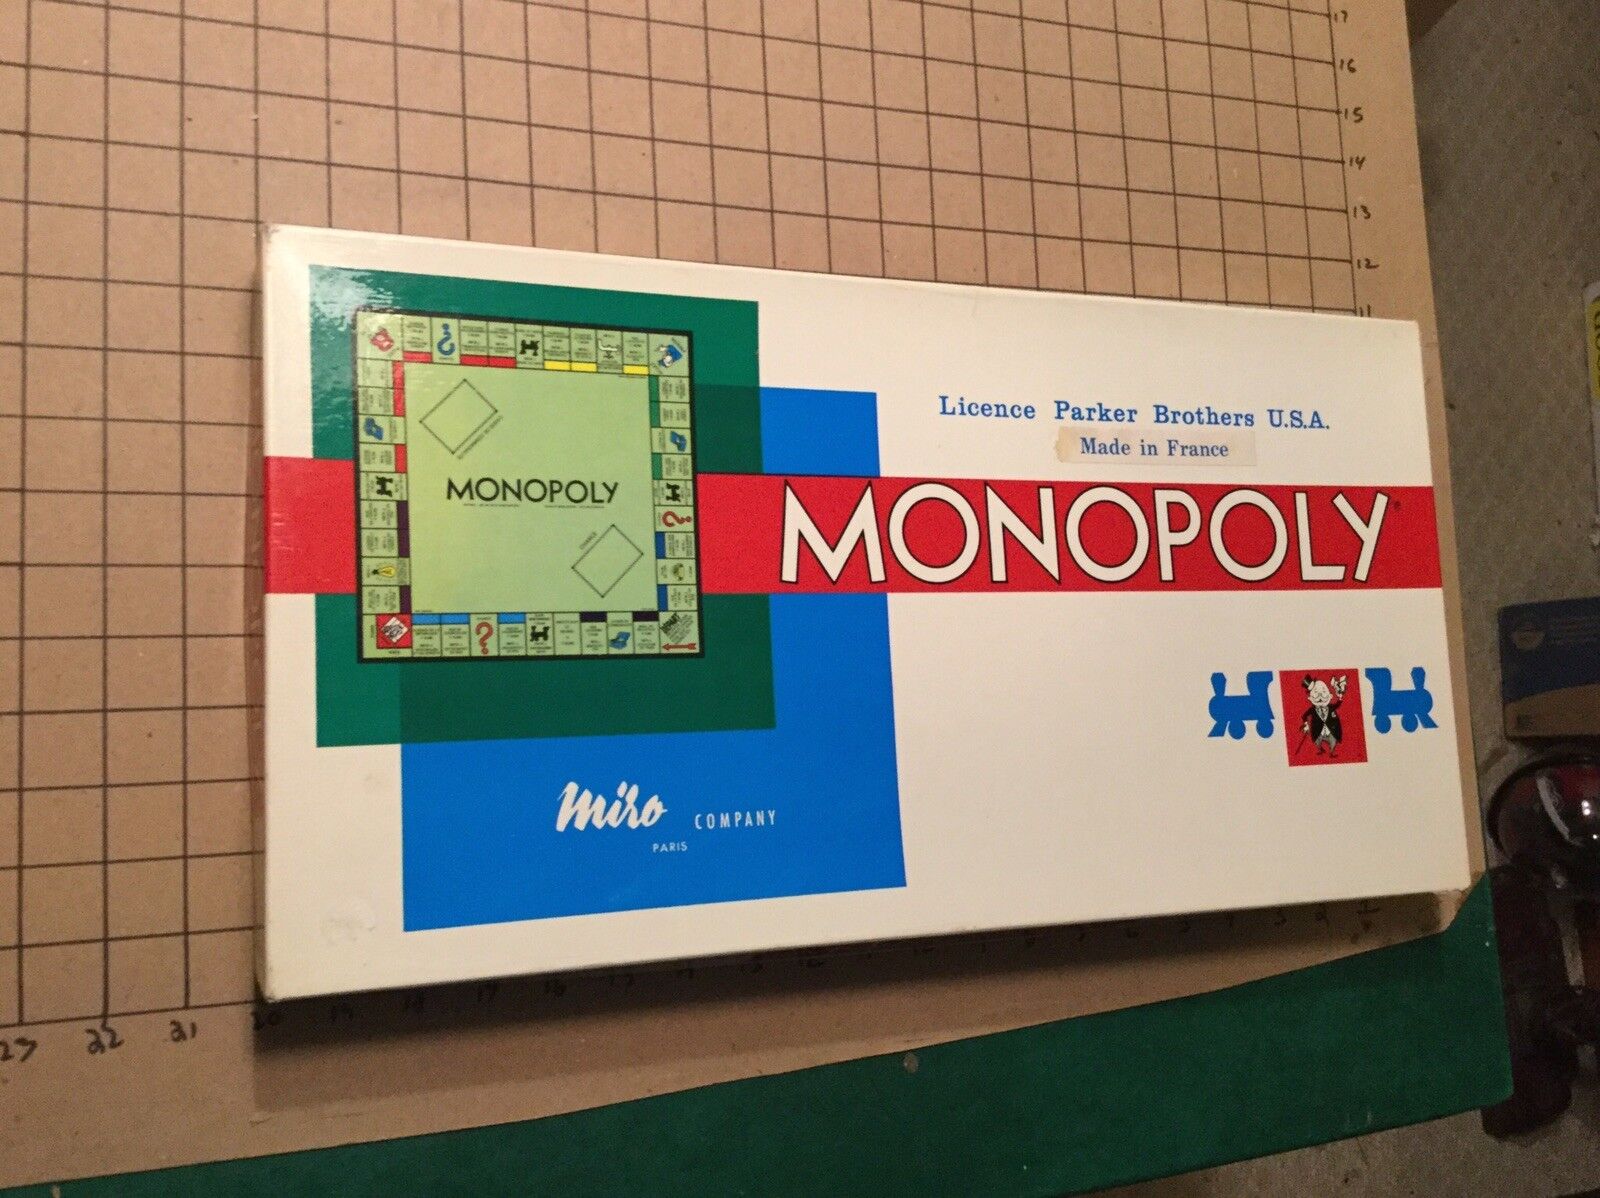 original French language Monopoly game - complete